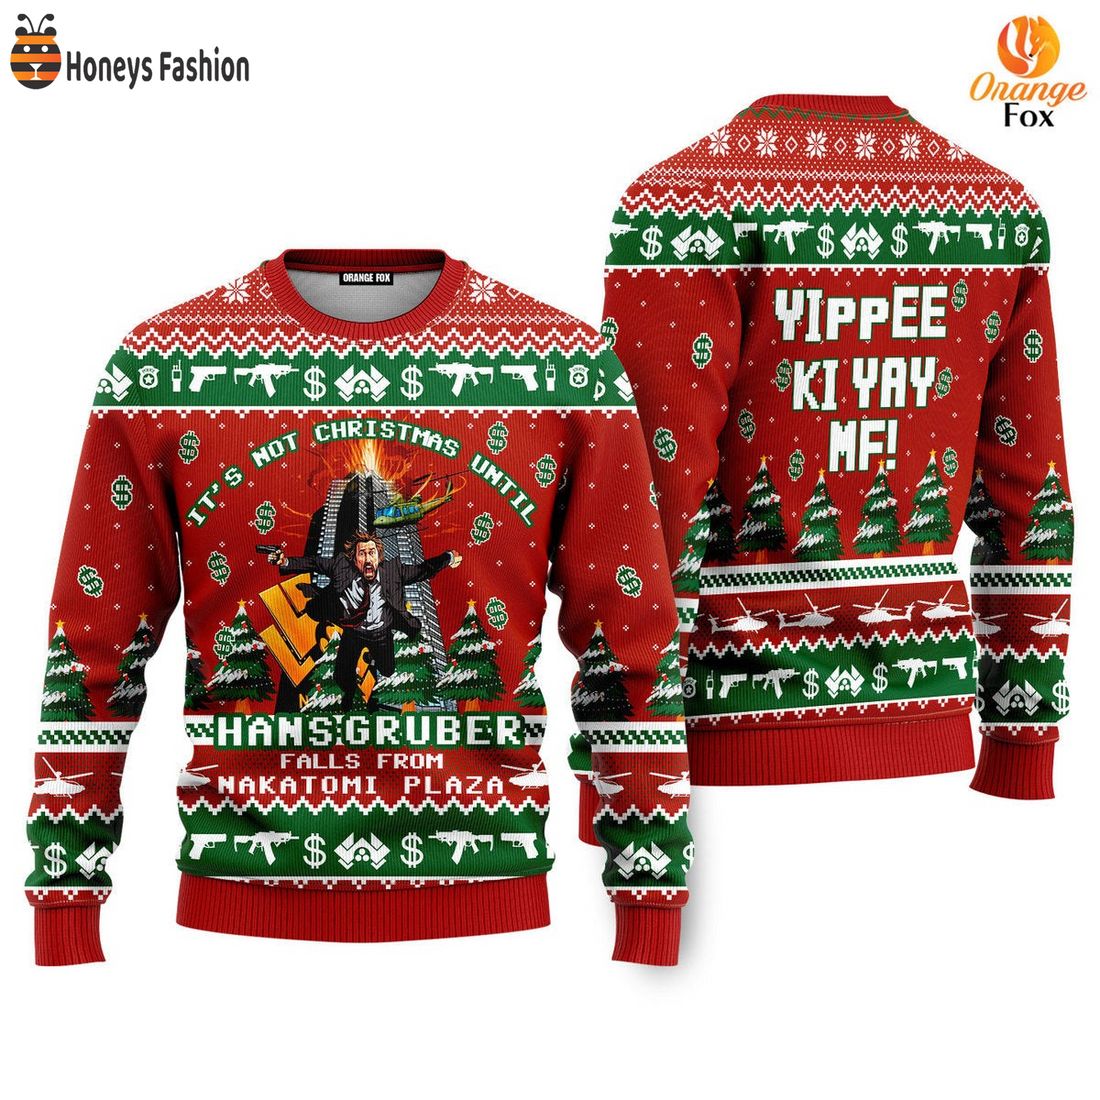 Hans Gruber It’s Not Christmas Until Fall From Nakatomi Plaza Ugly Christmas Sweater